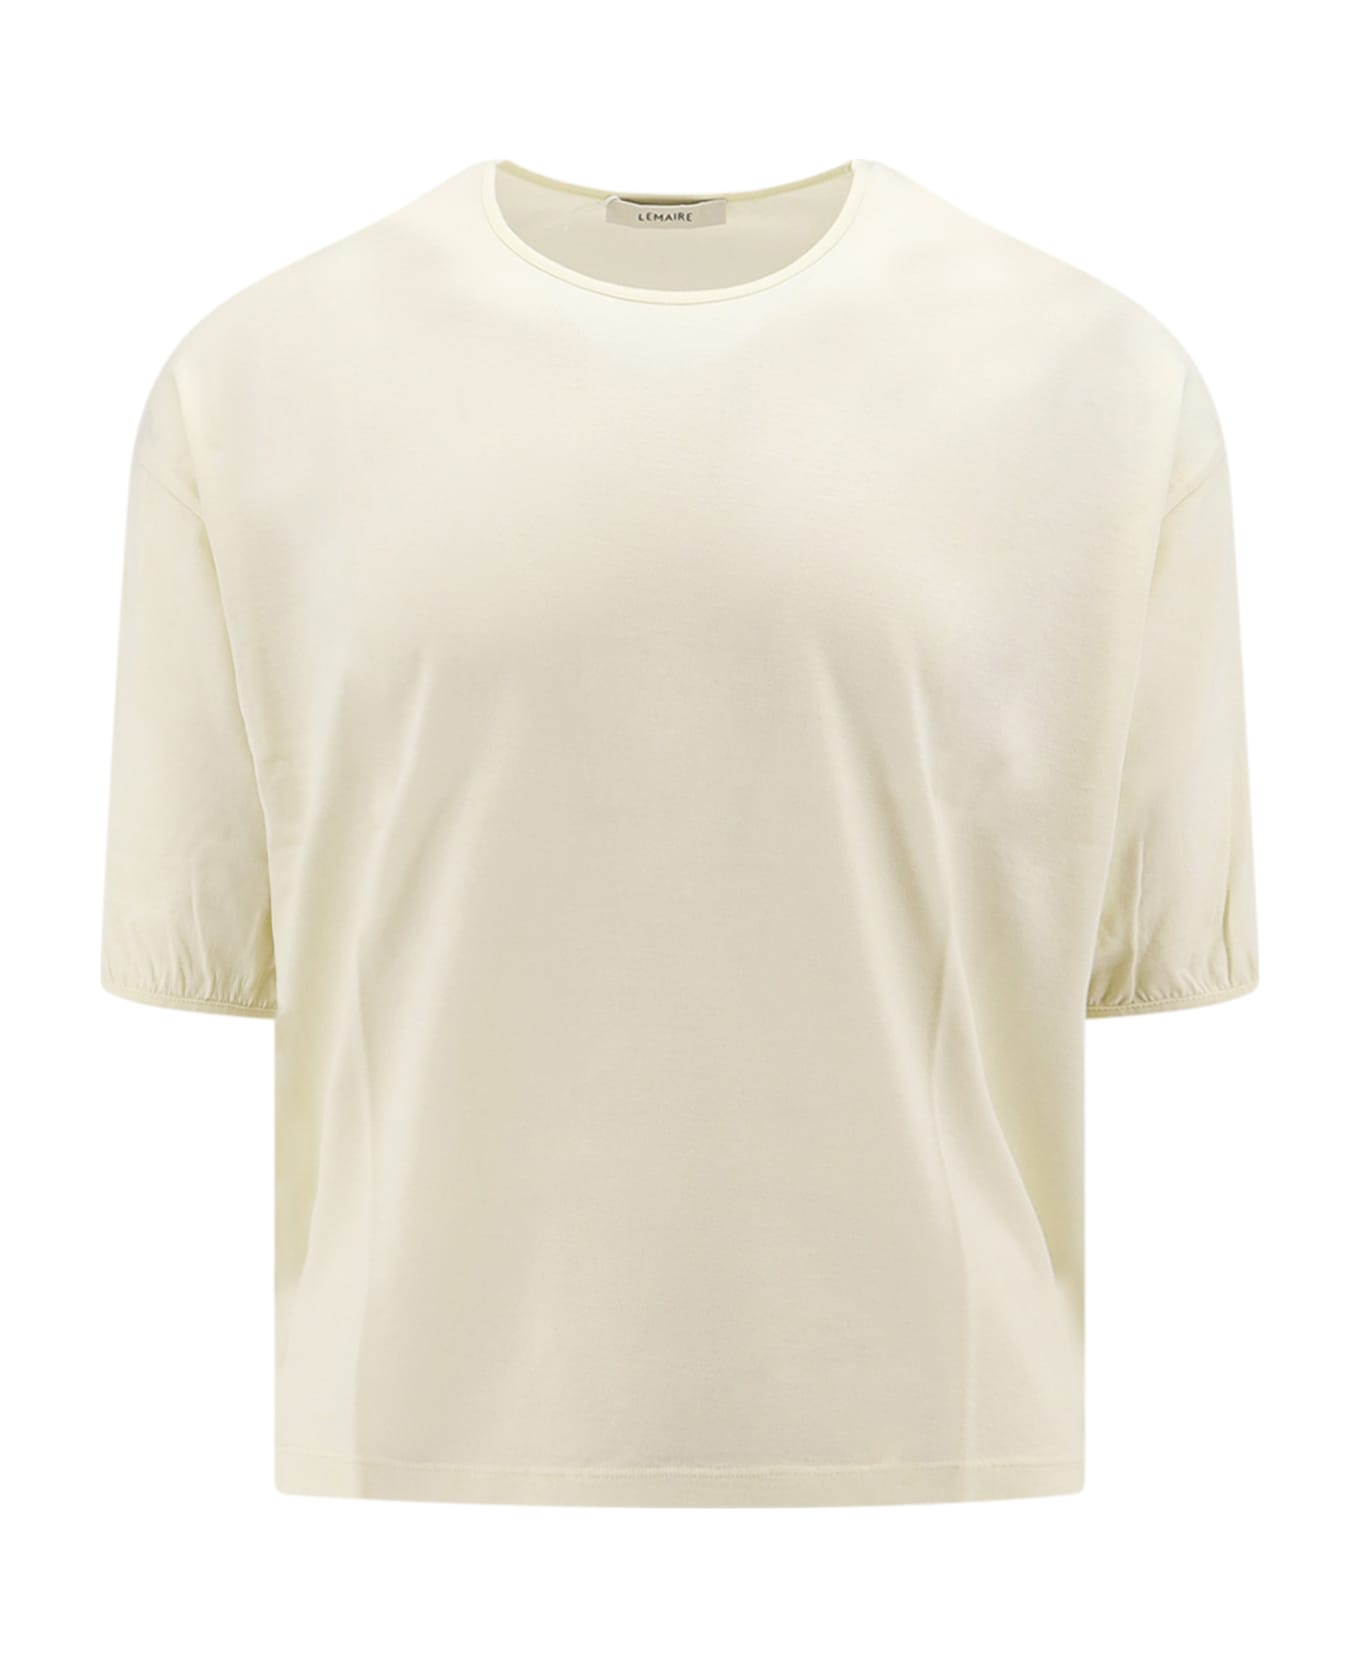 Lemaire T-shirt - Yellow シャツ